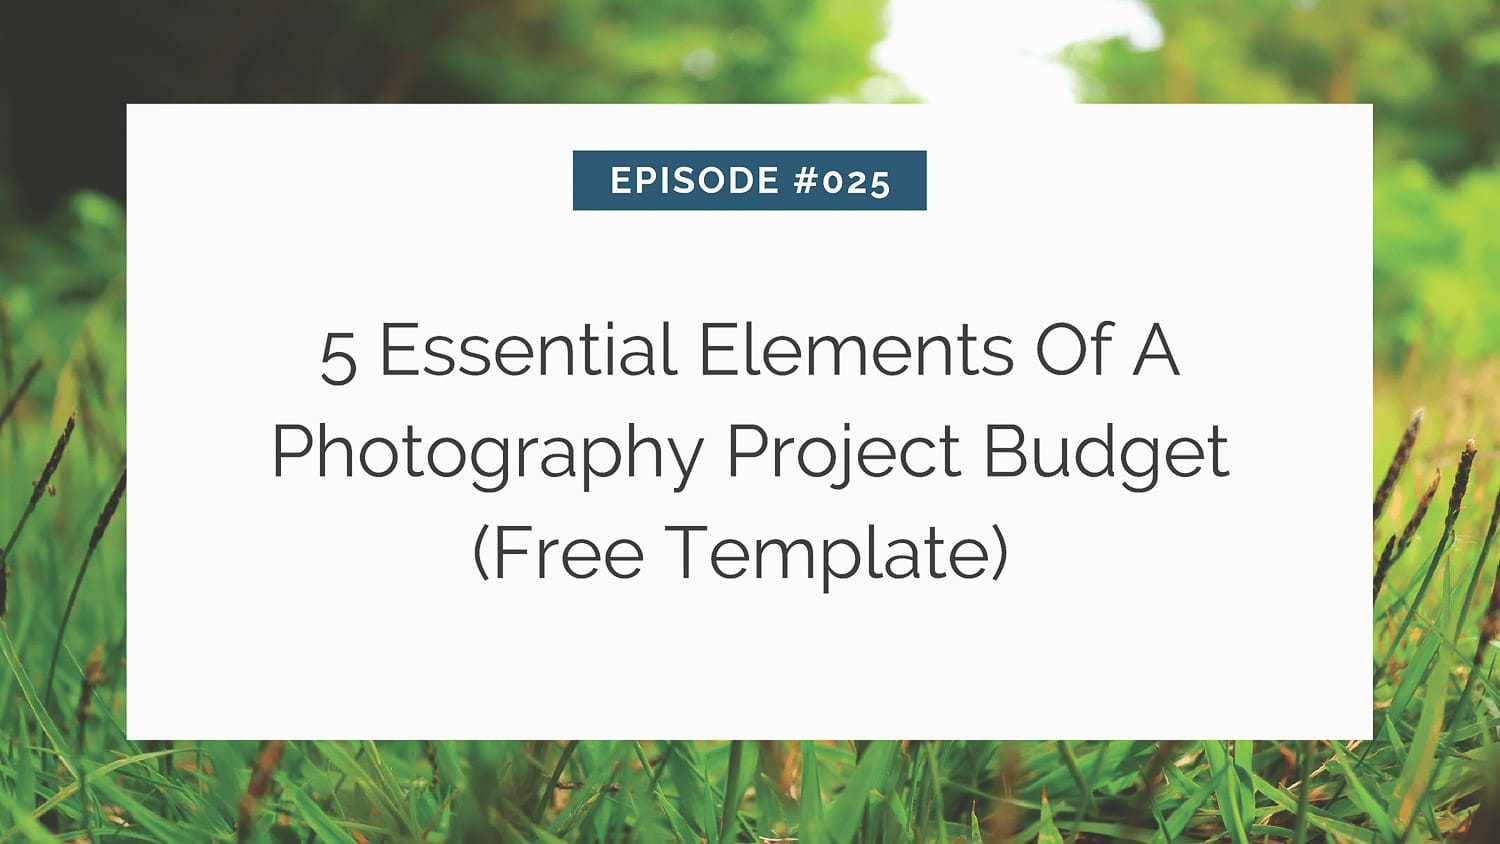 Slide presentation frame about photography project budgeting, offering a free template.